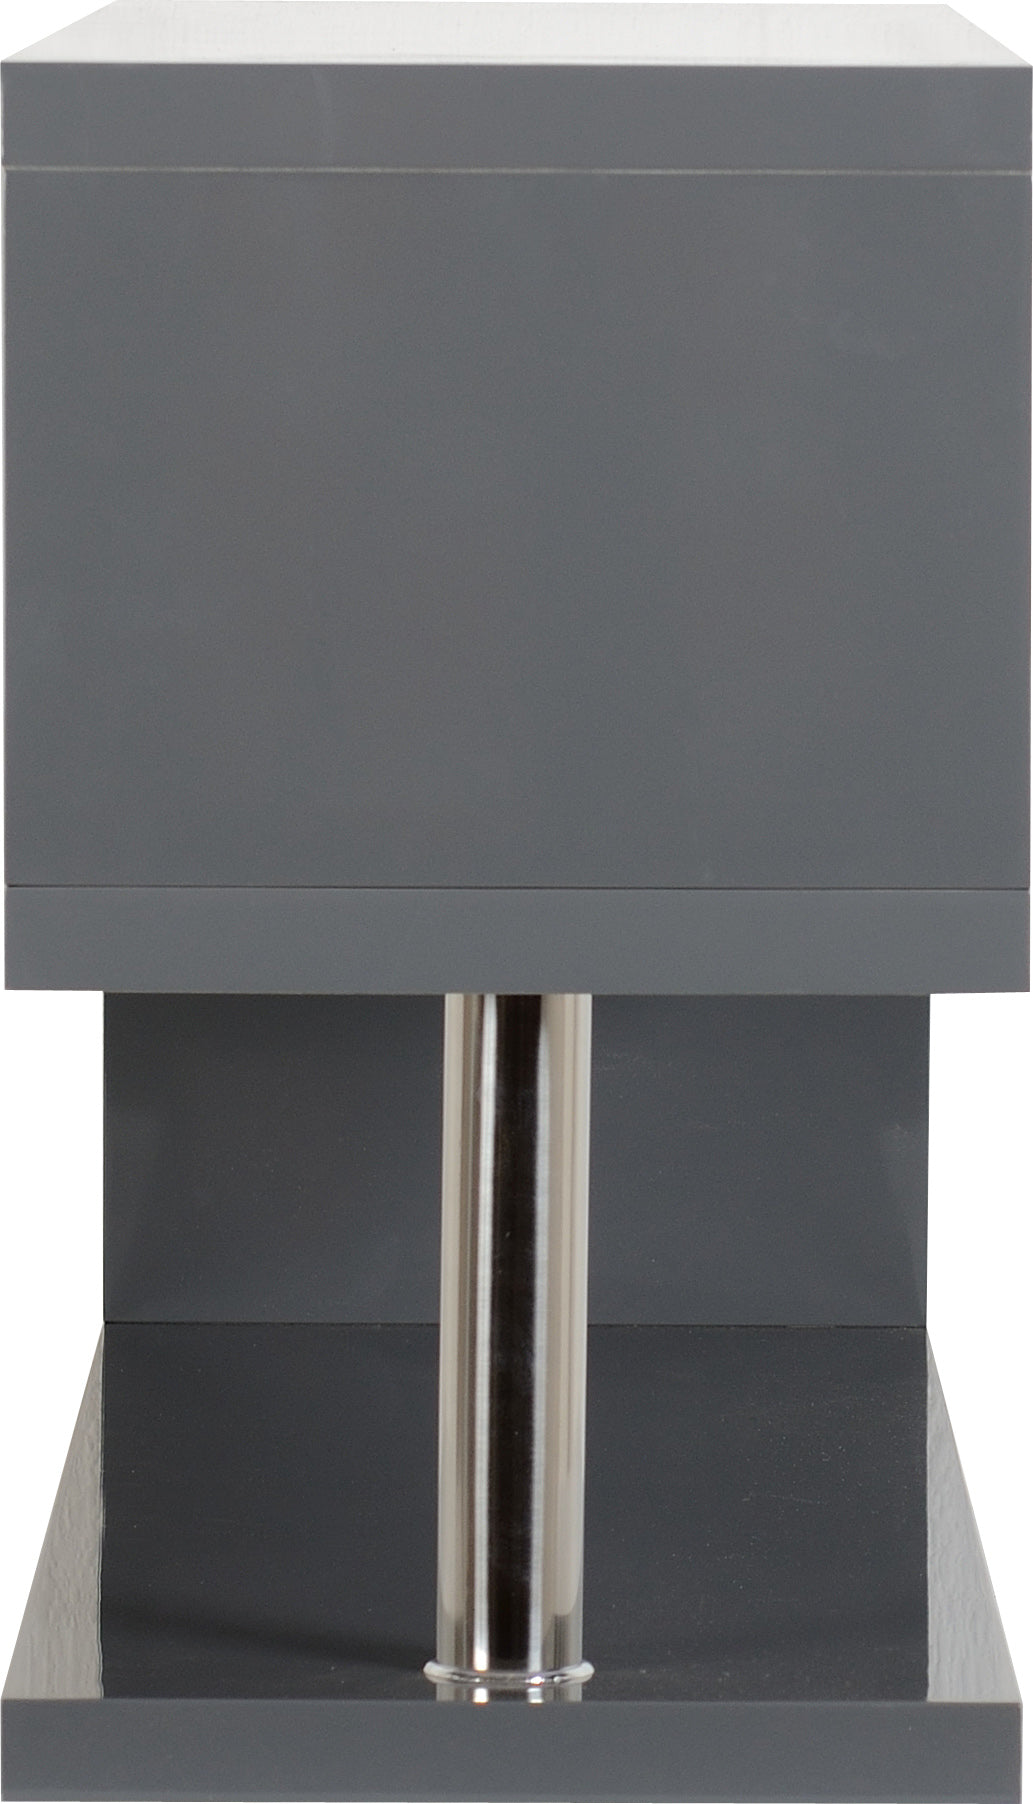 Charisma TV Stand - Grey Gloss/Chrome - The Right Buy Store